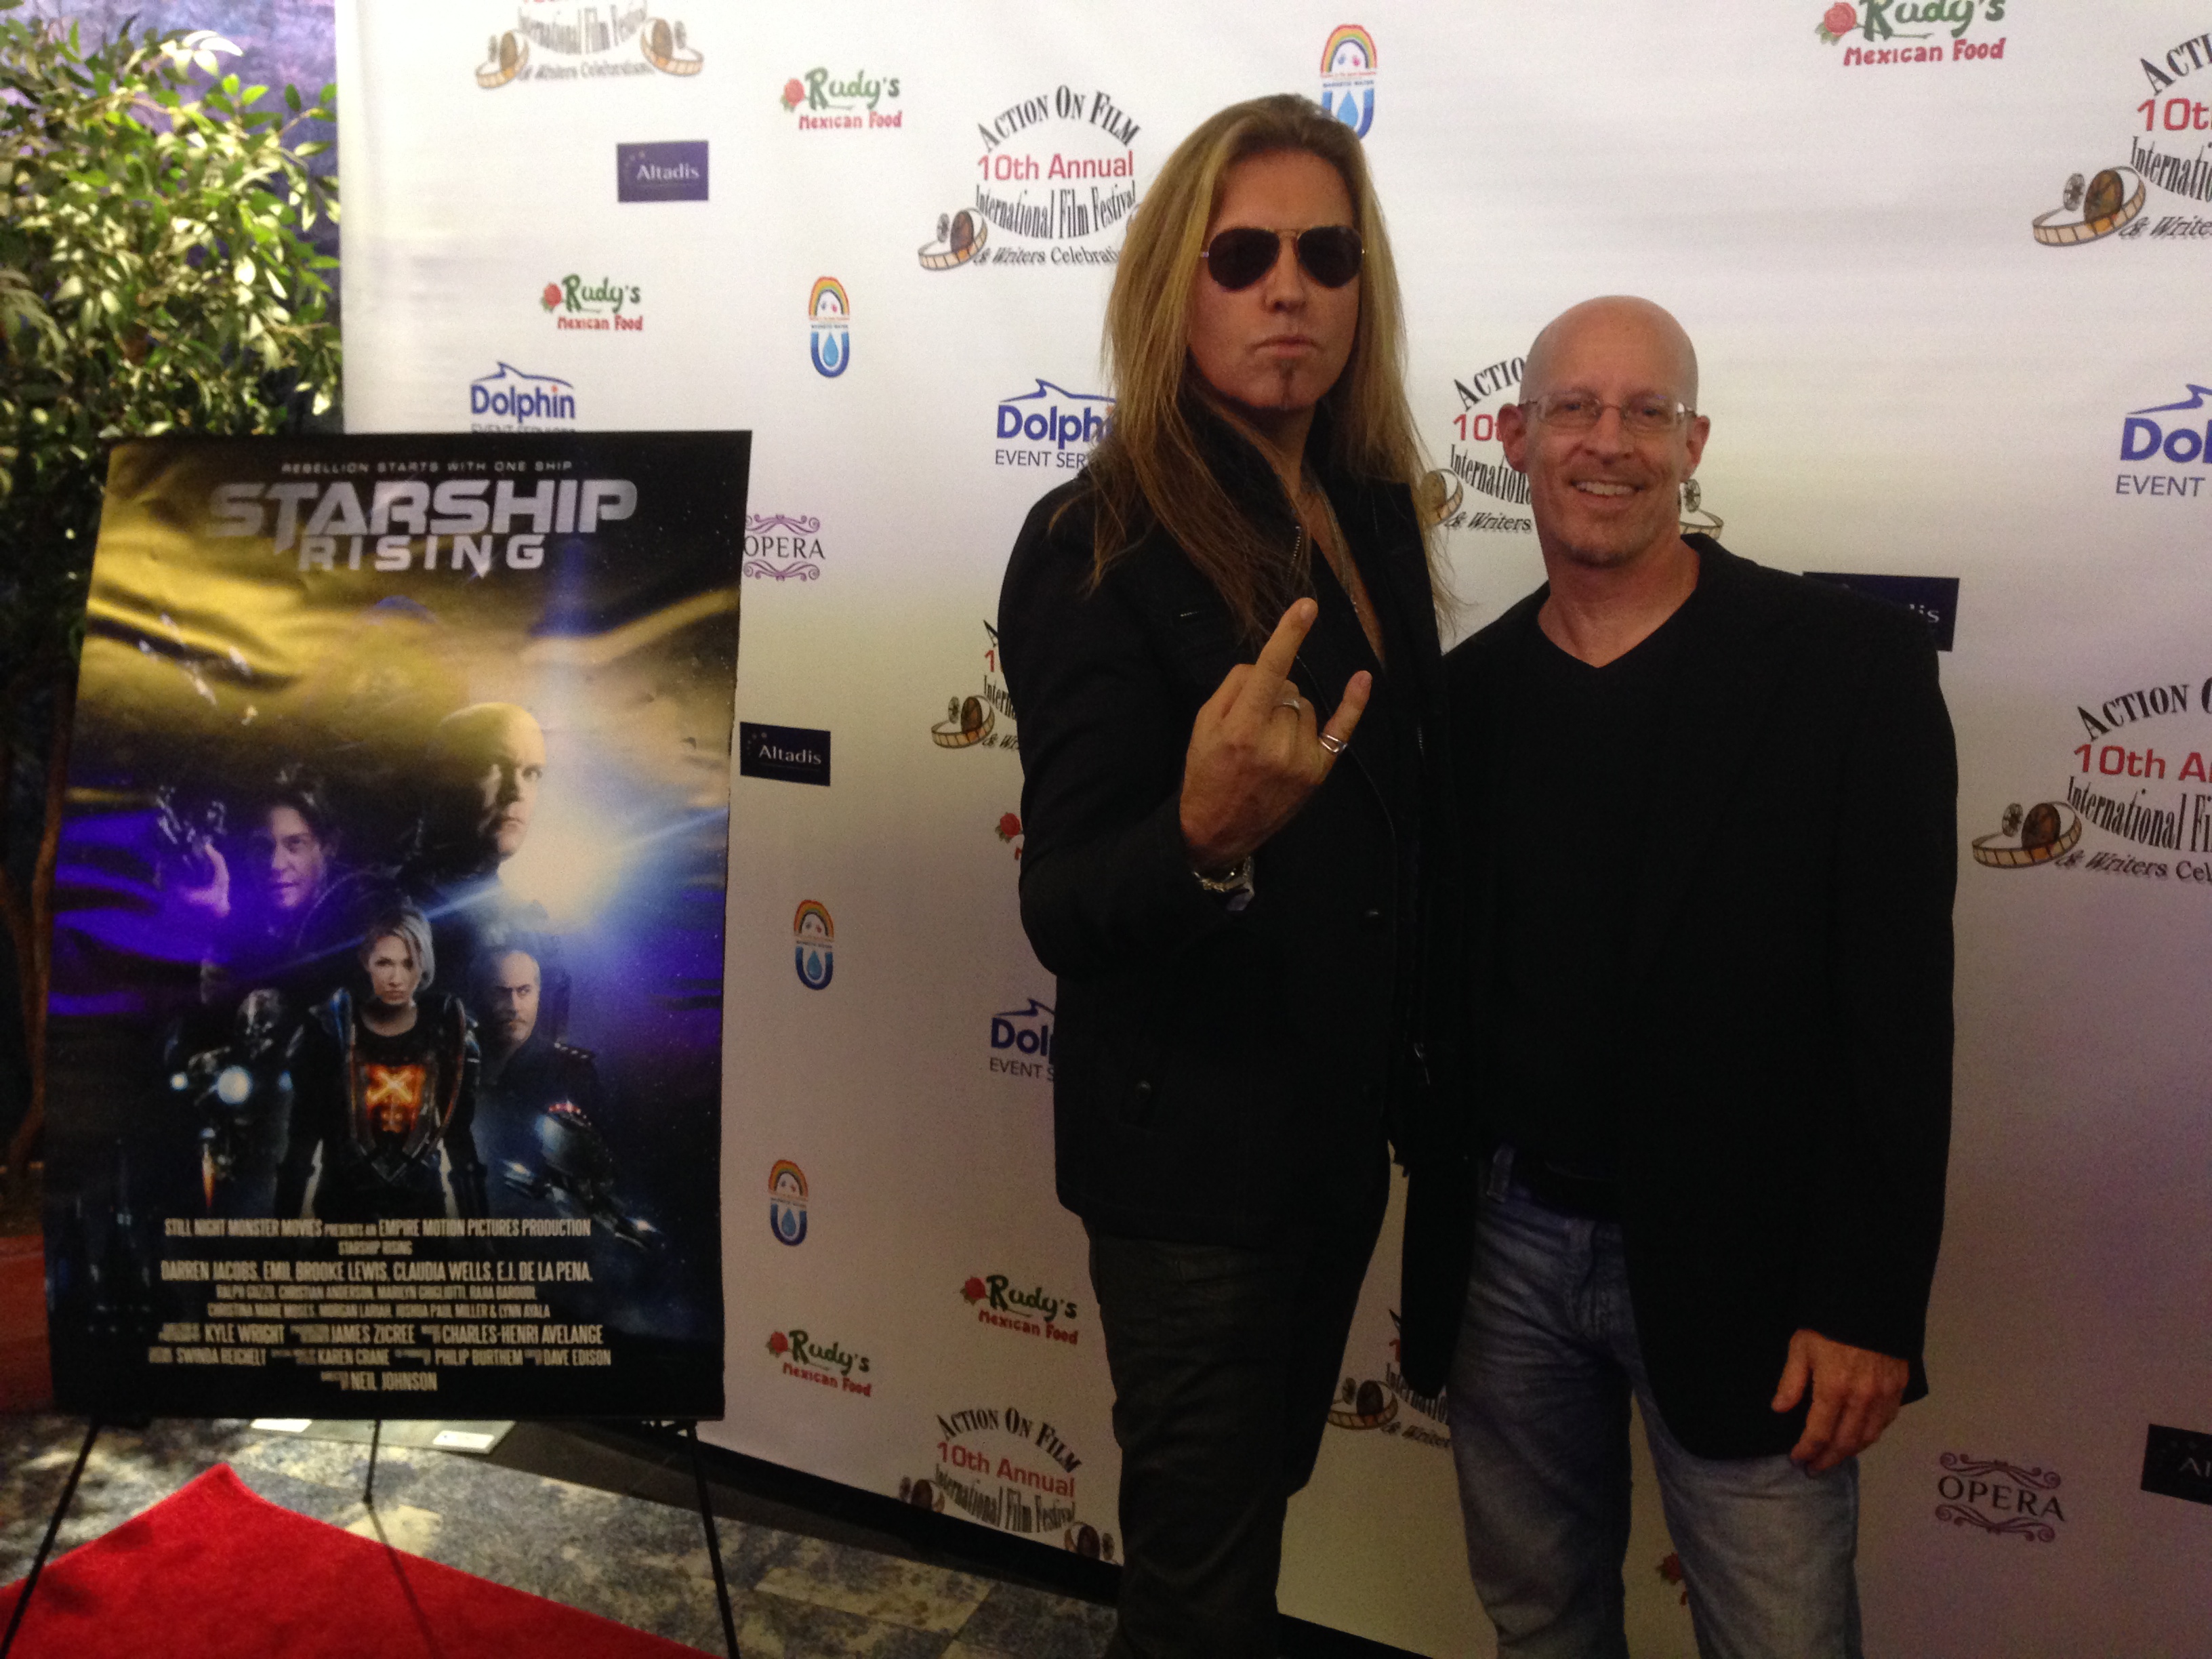 Neil Johnson at the premiere of Starship: Rising